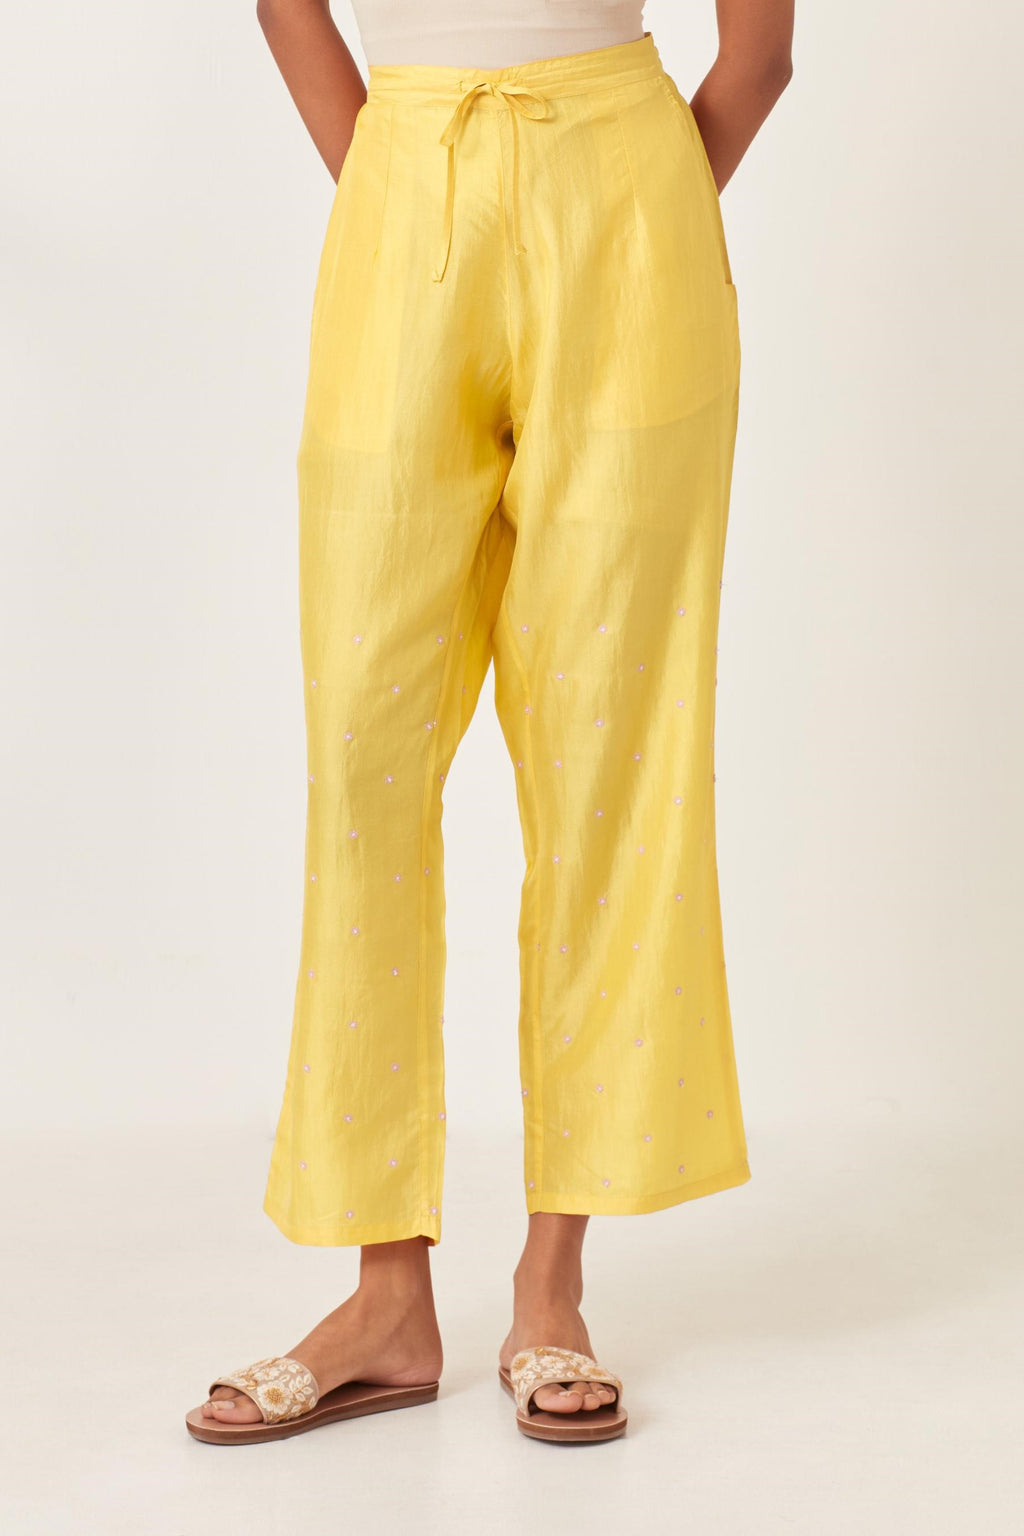 Yellow silk straight pants detailed with small flower embroidery at bottom.